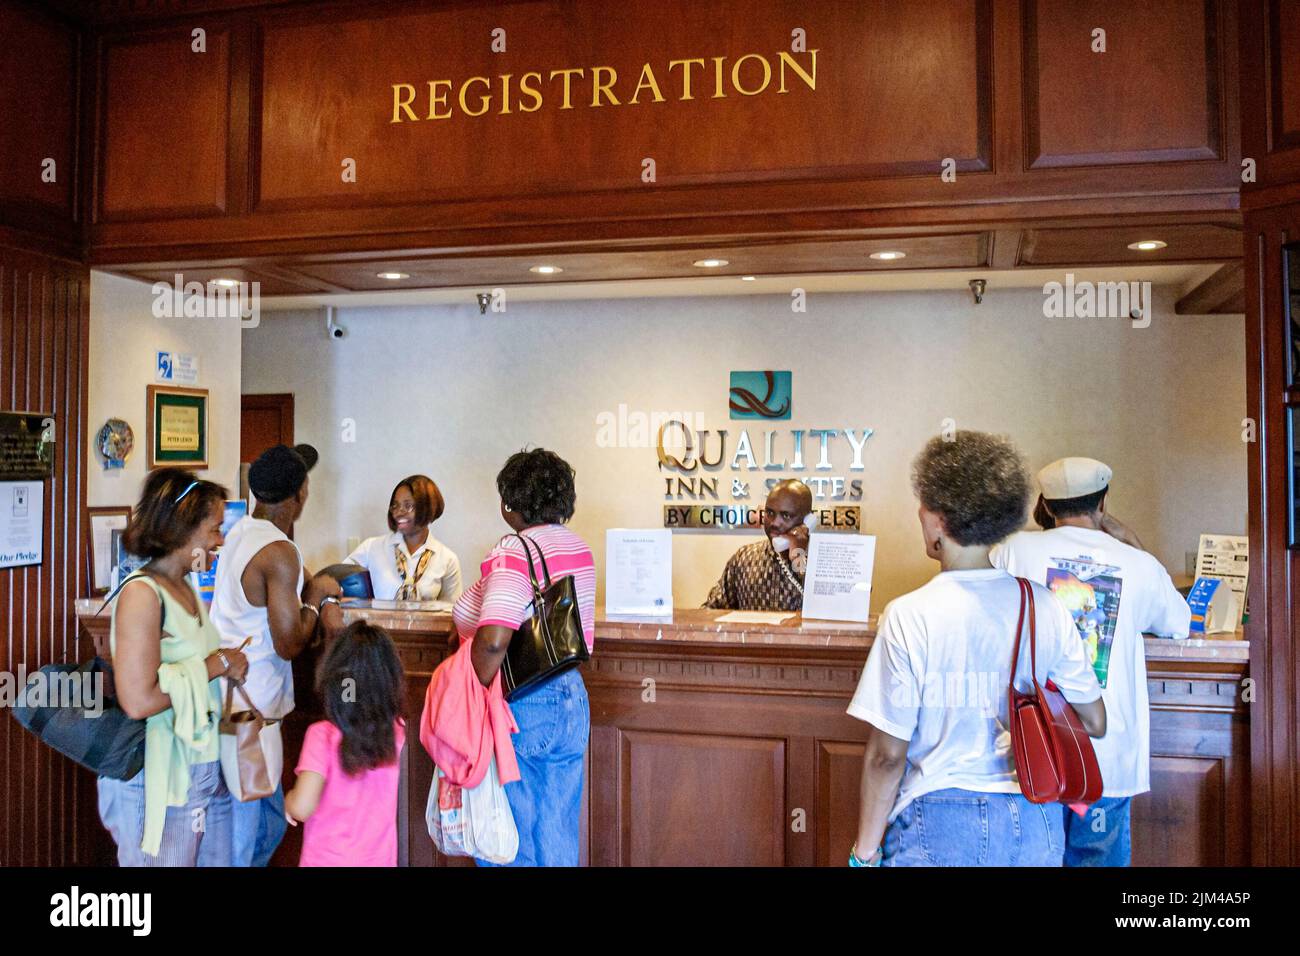 Hampton Virginia,Tidewater Area,Quality Inn & Suites hotel hotels lodging lobby front desk reservation registration Black families guests checking in Stock Photo